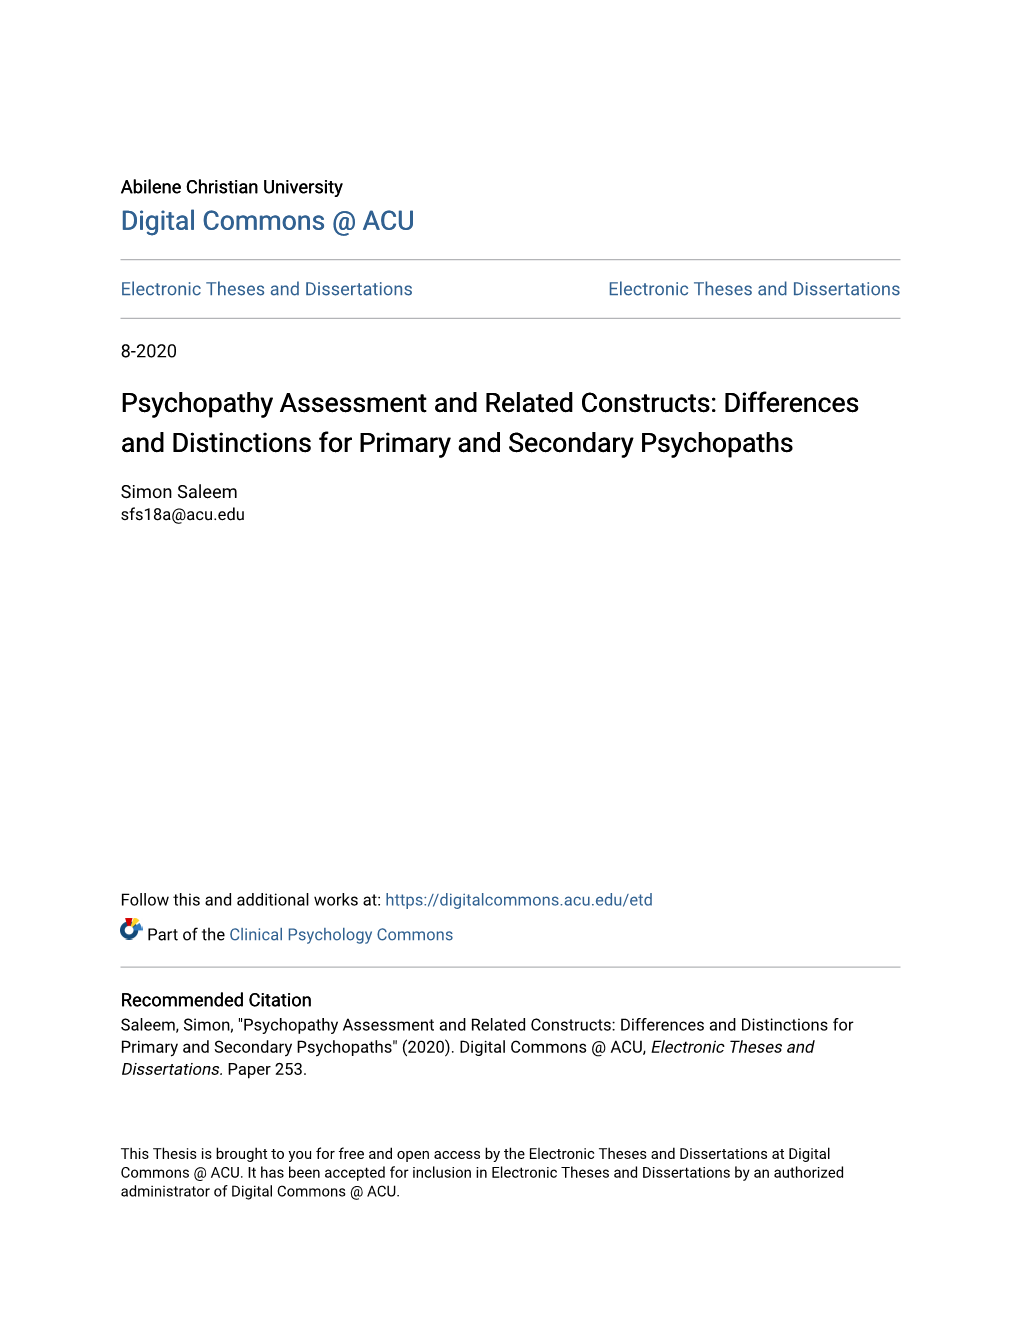 Differences and Distinctions for Primary and Secondary Psychopaths